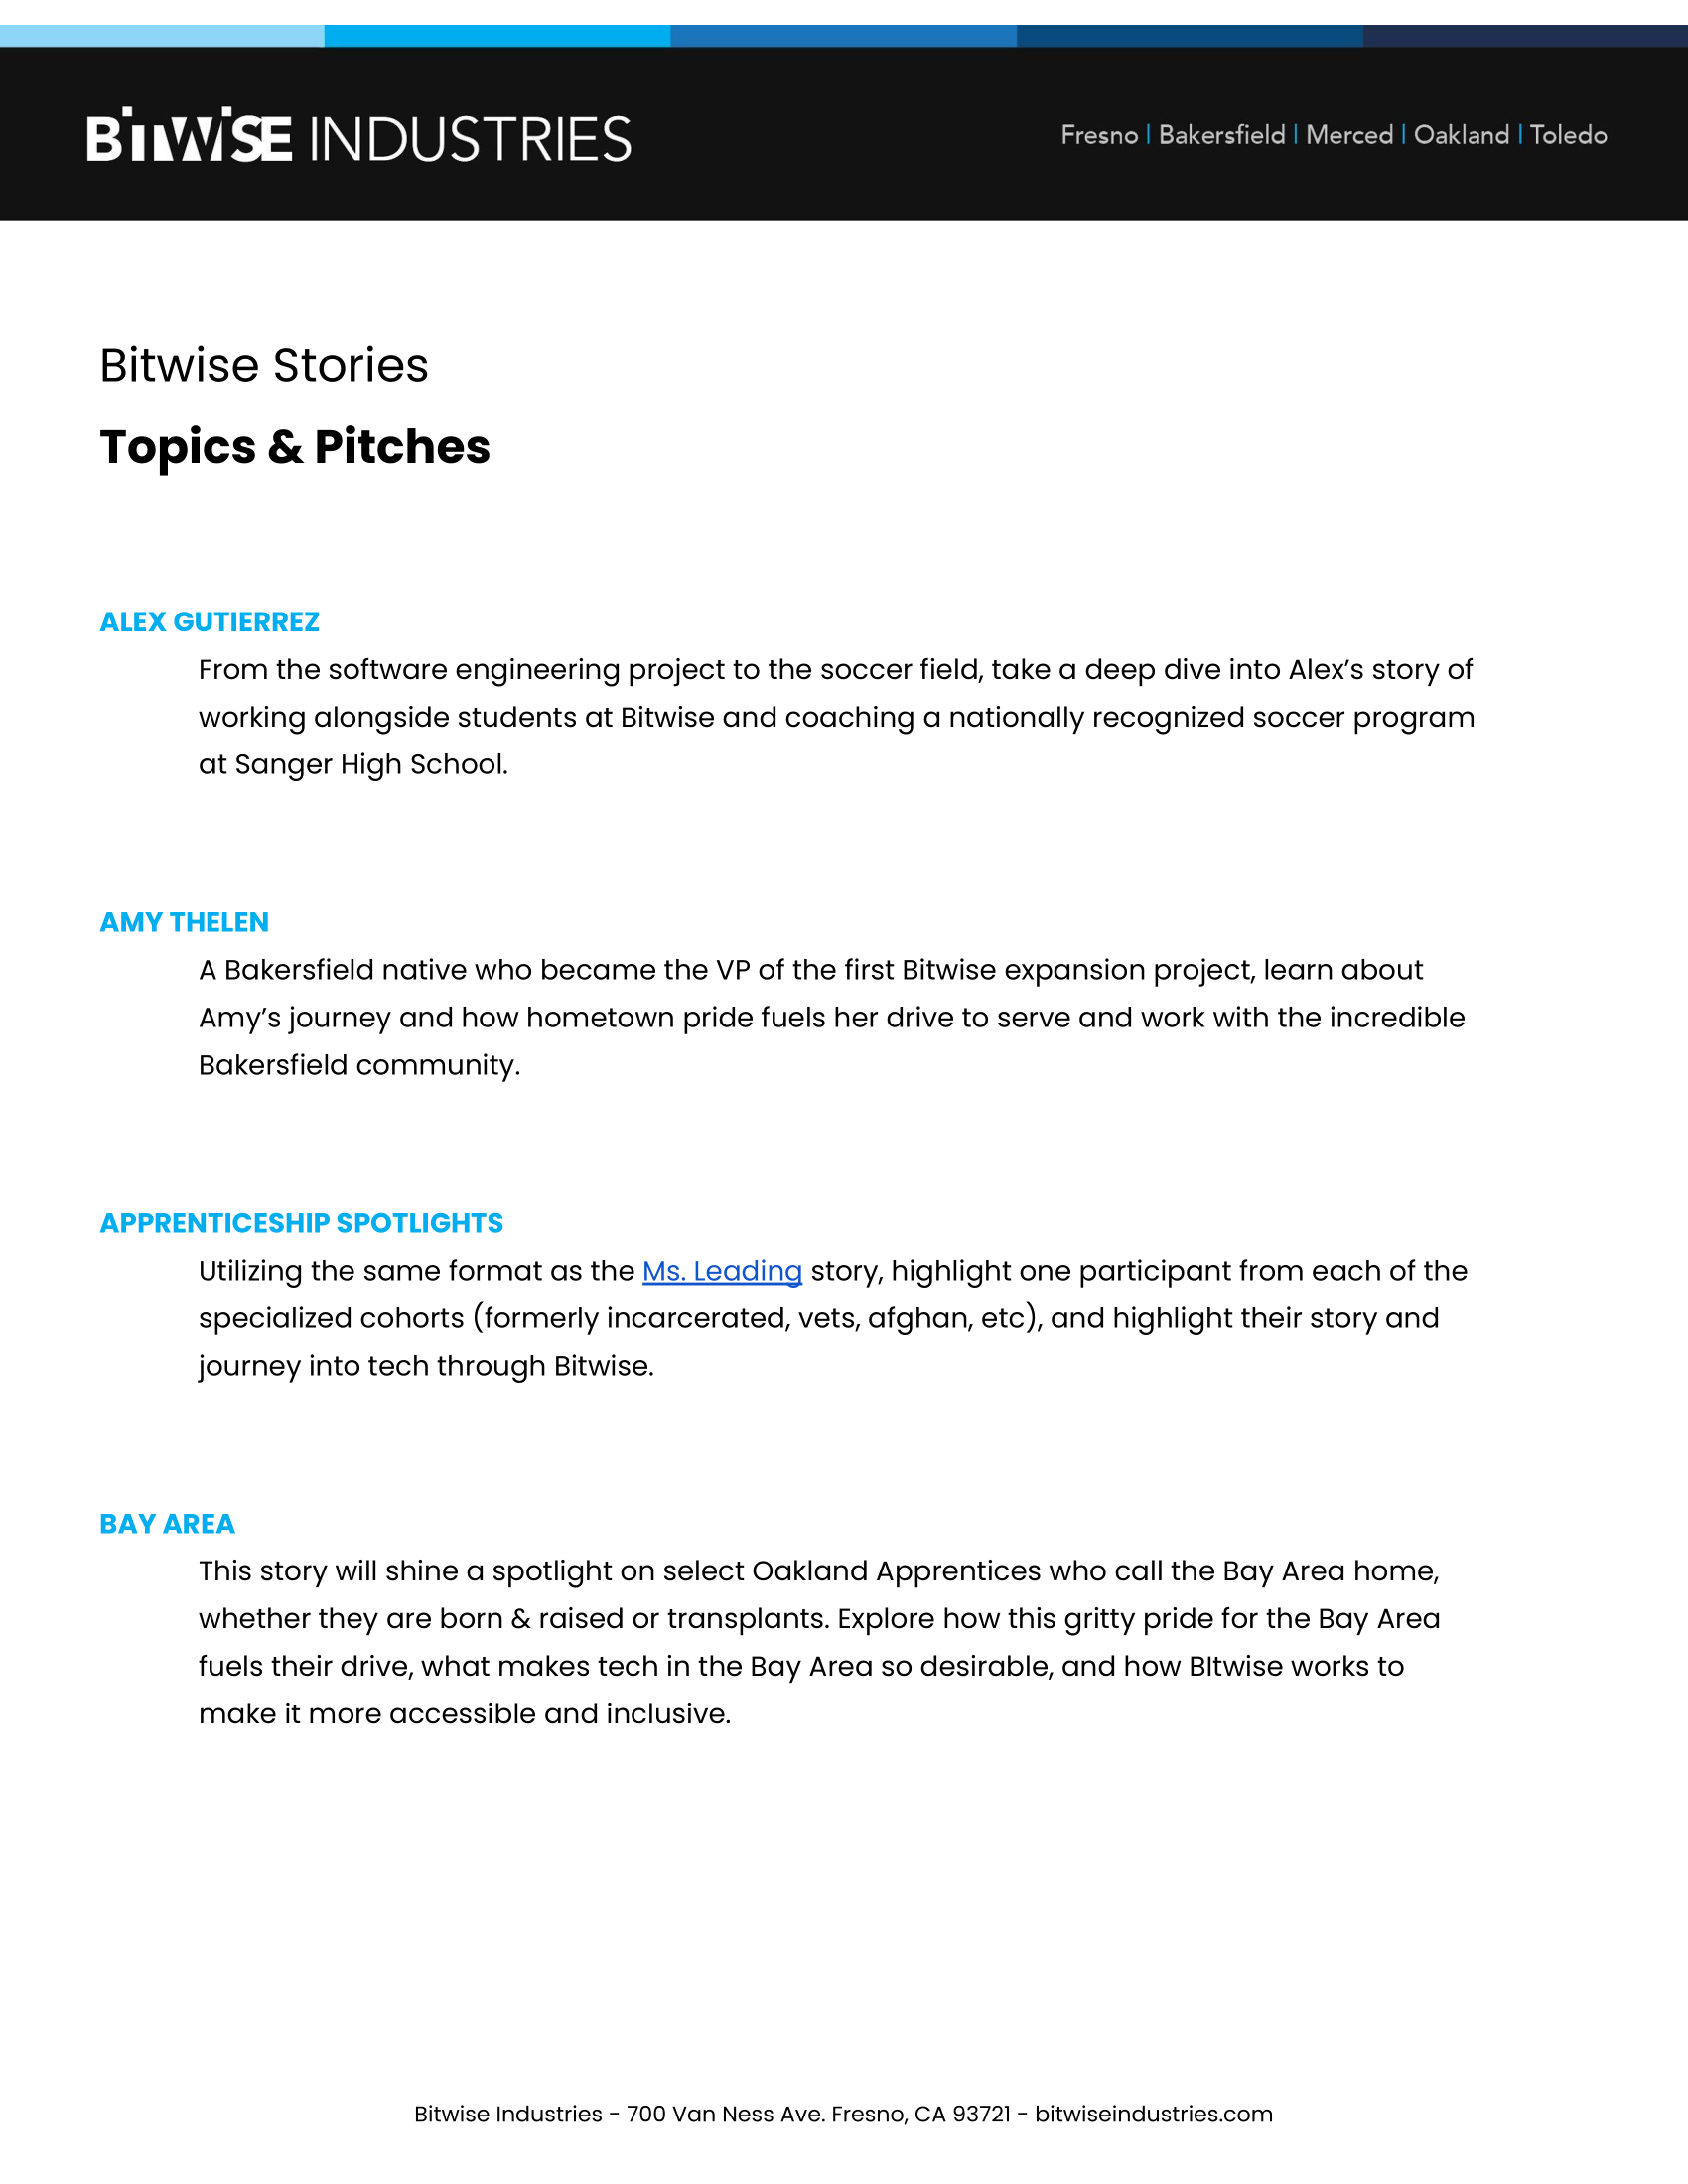 Bitwise Stories _ Topics _ Pitches.docx-1.png